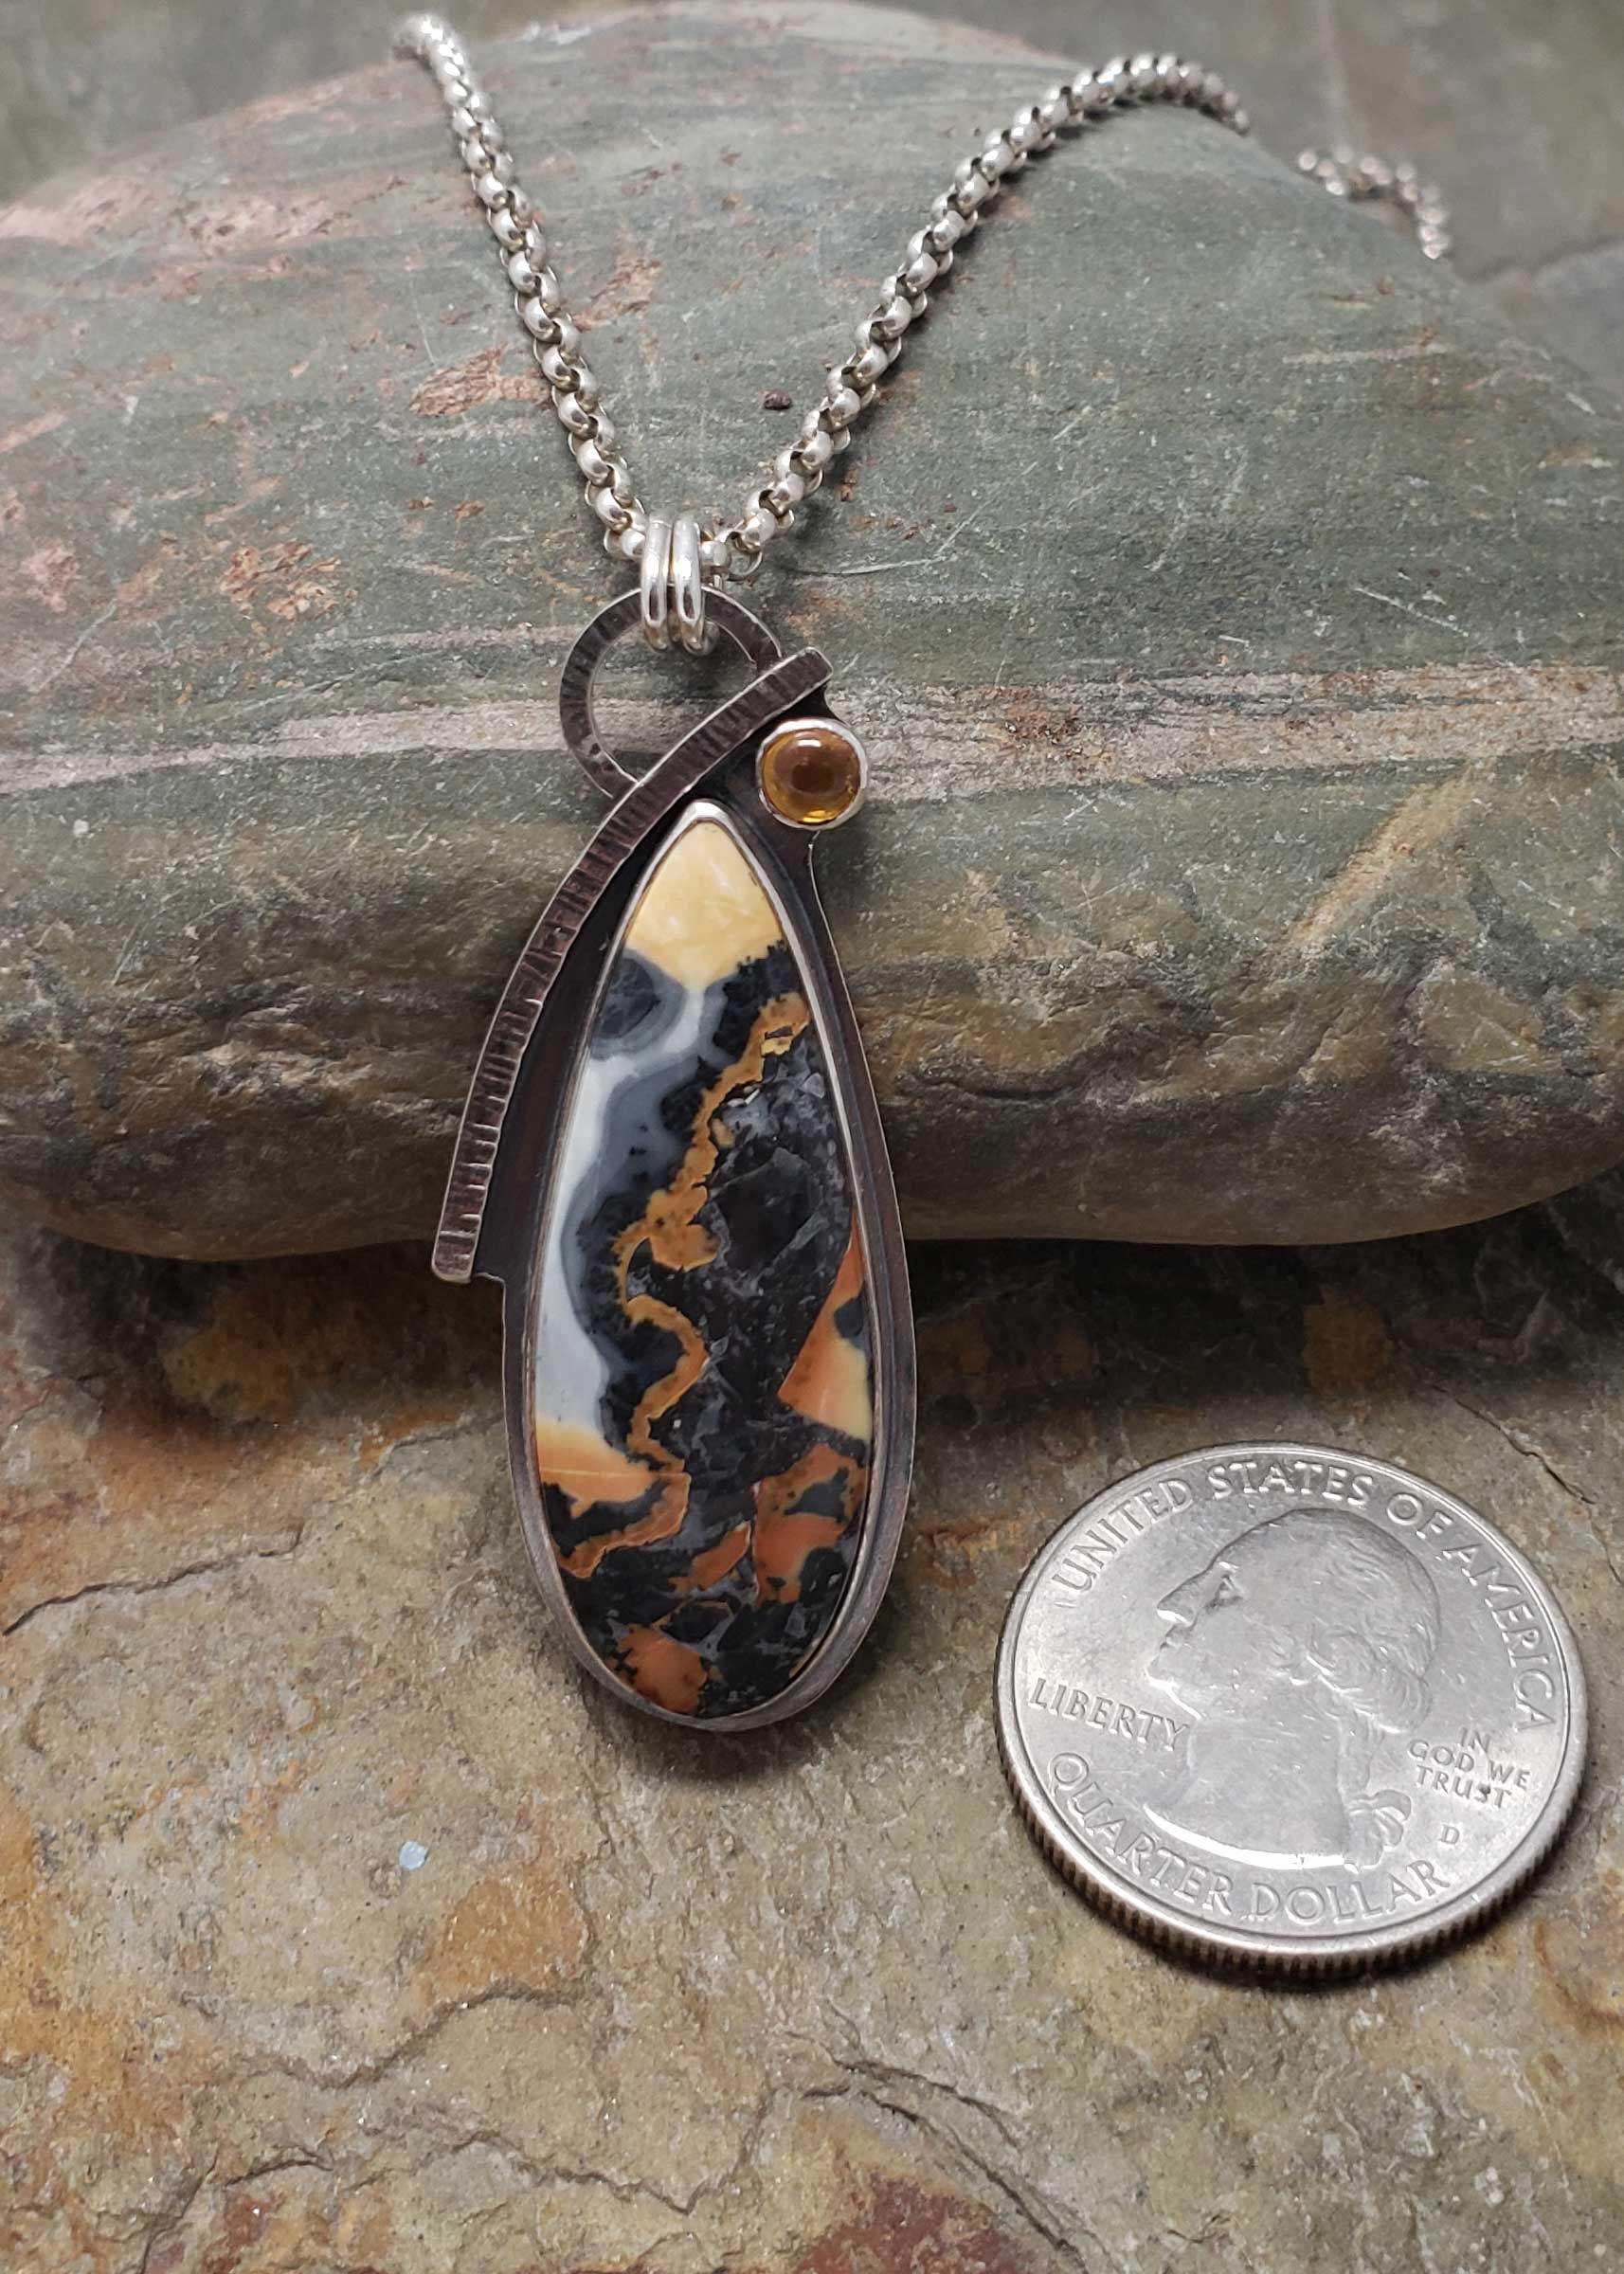 gold and blacks are featured in this sterling silver pendant of maligano jasper and citrine